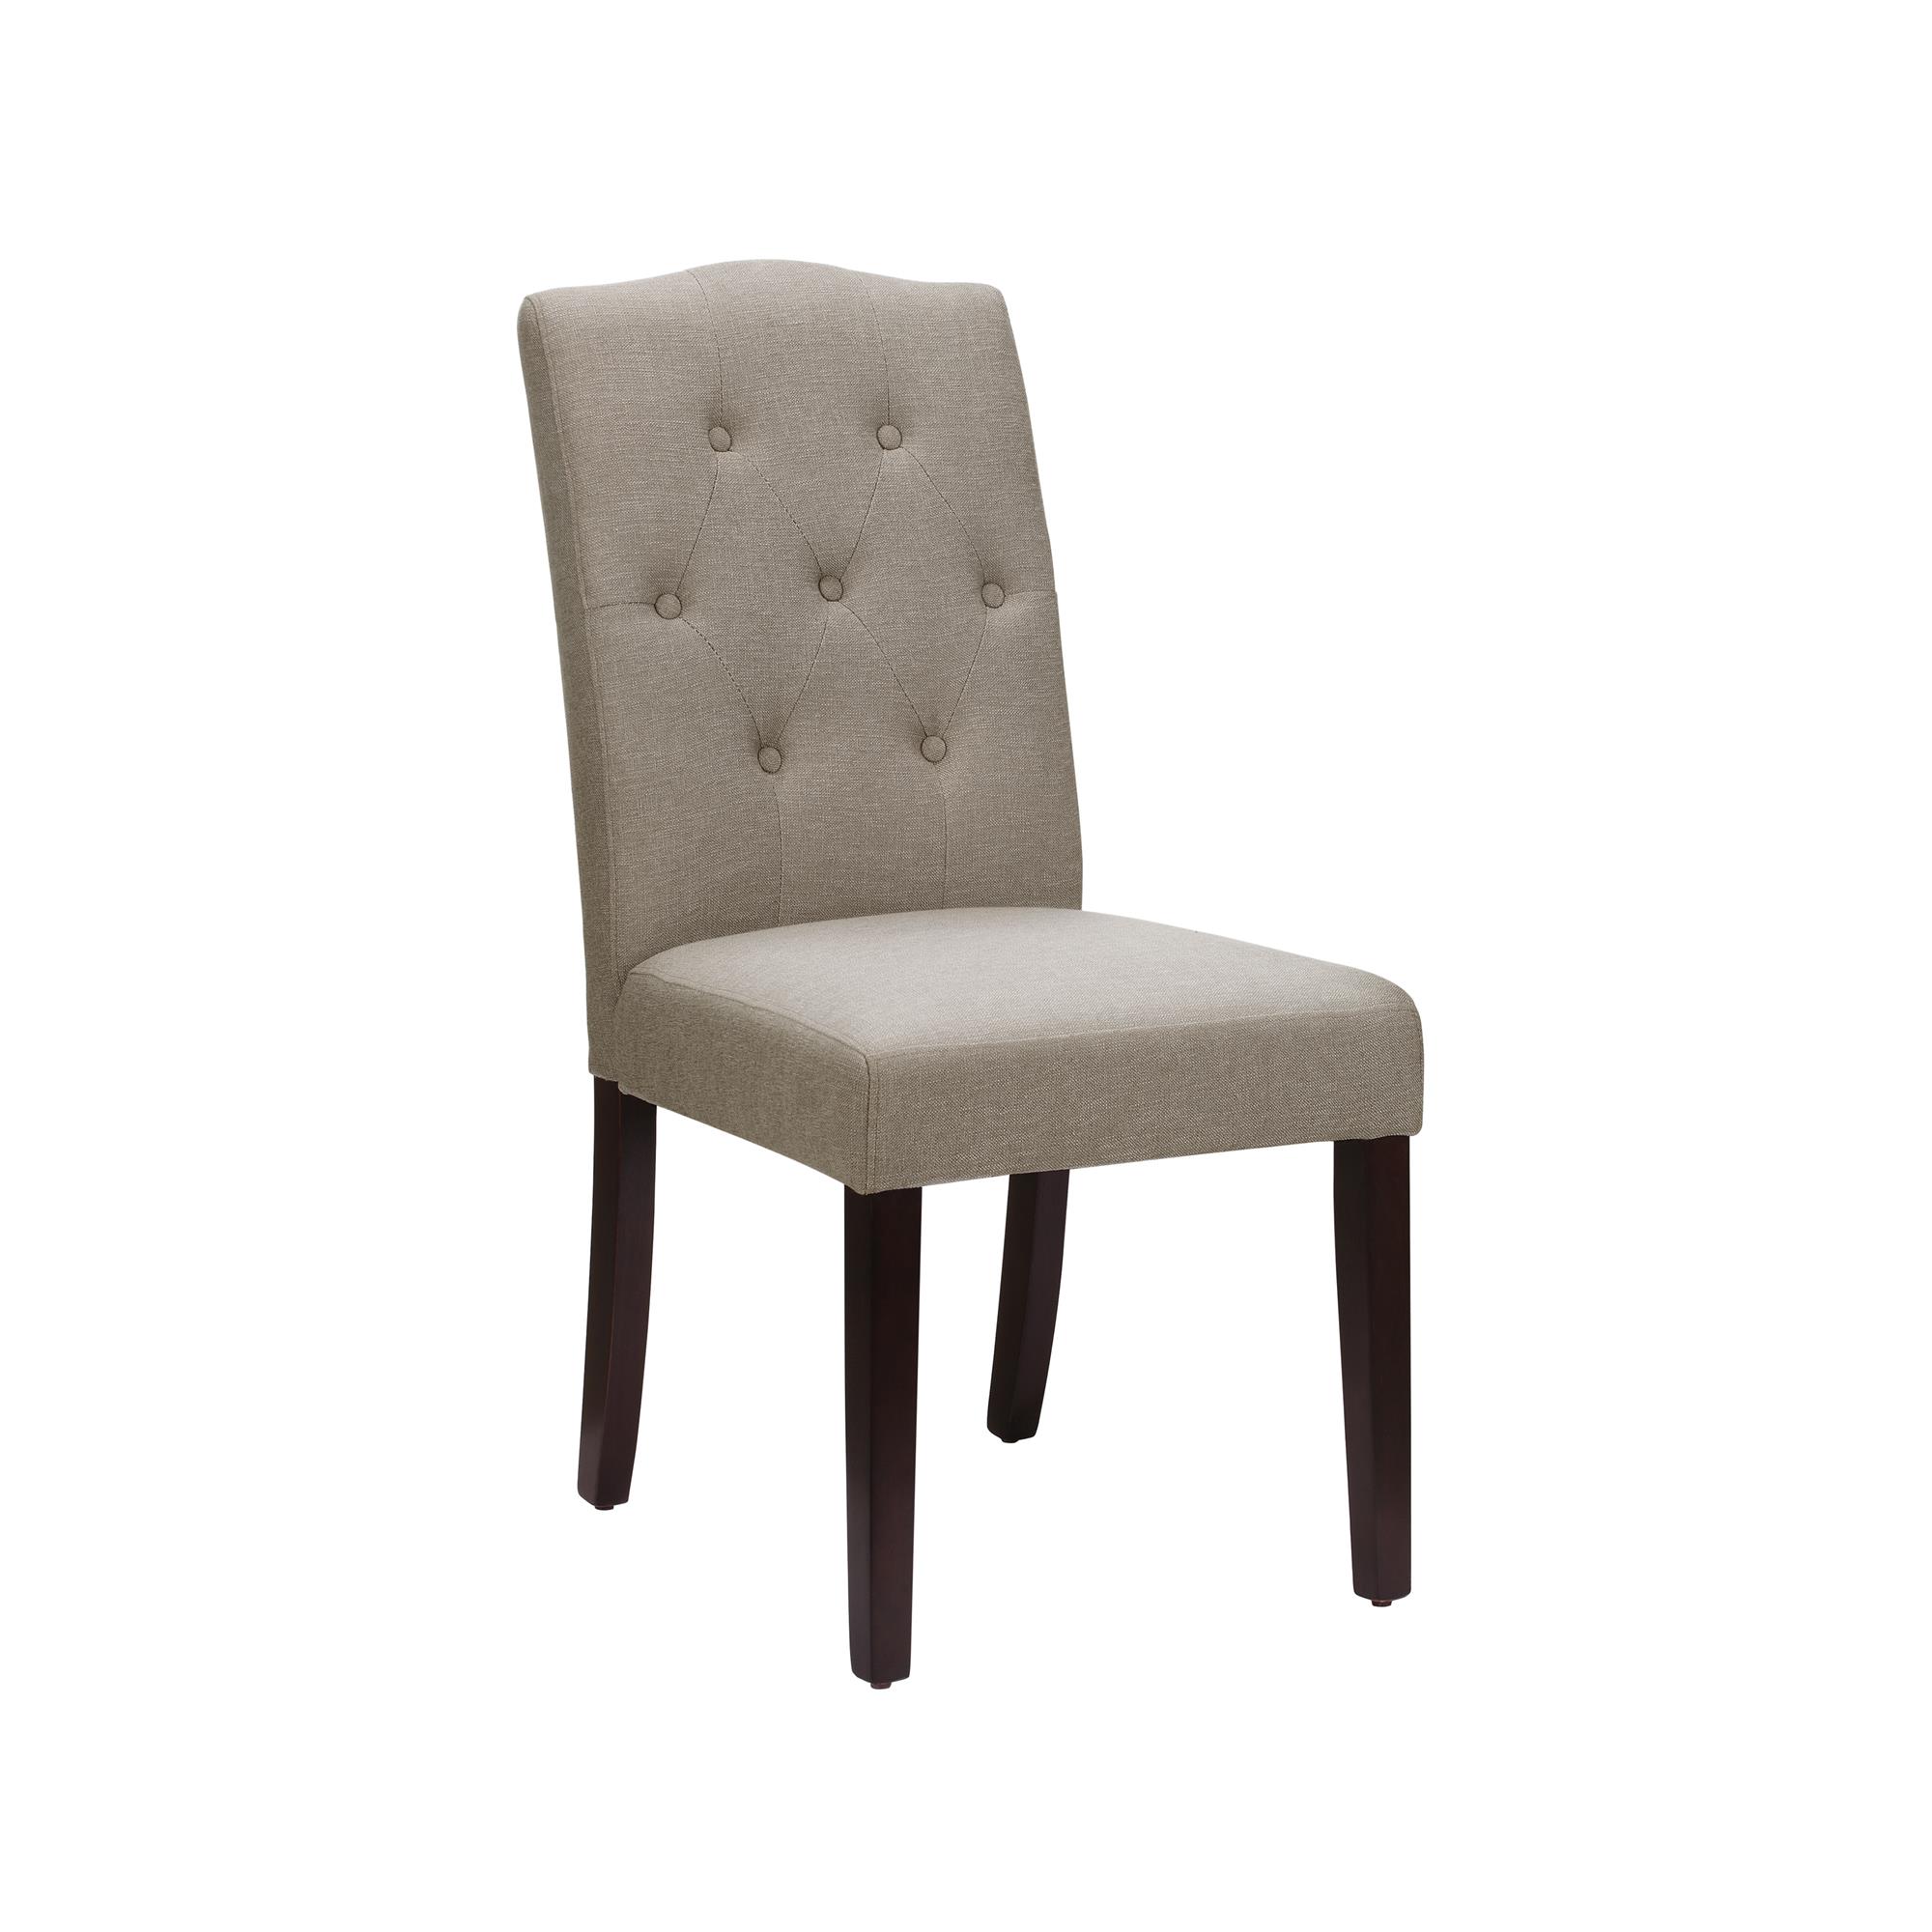 Better Homes and Gardens Parsons Upholstered Tufted Dining Chair,Taupe - image 4 of 9